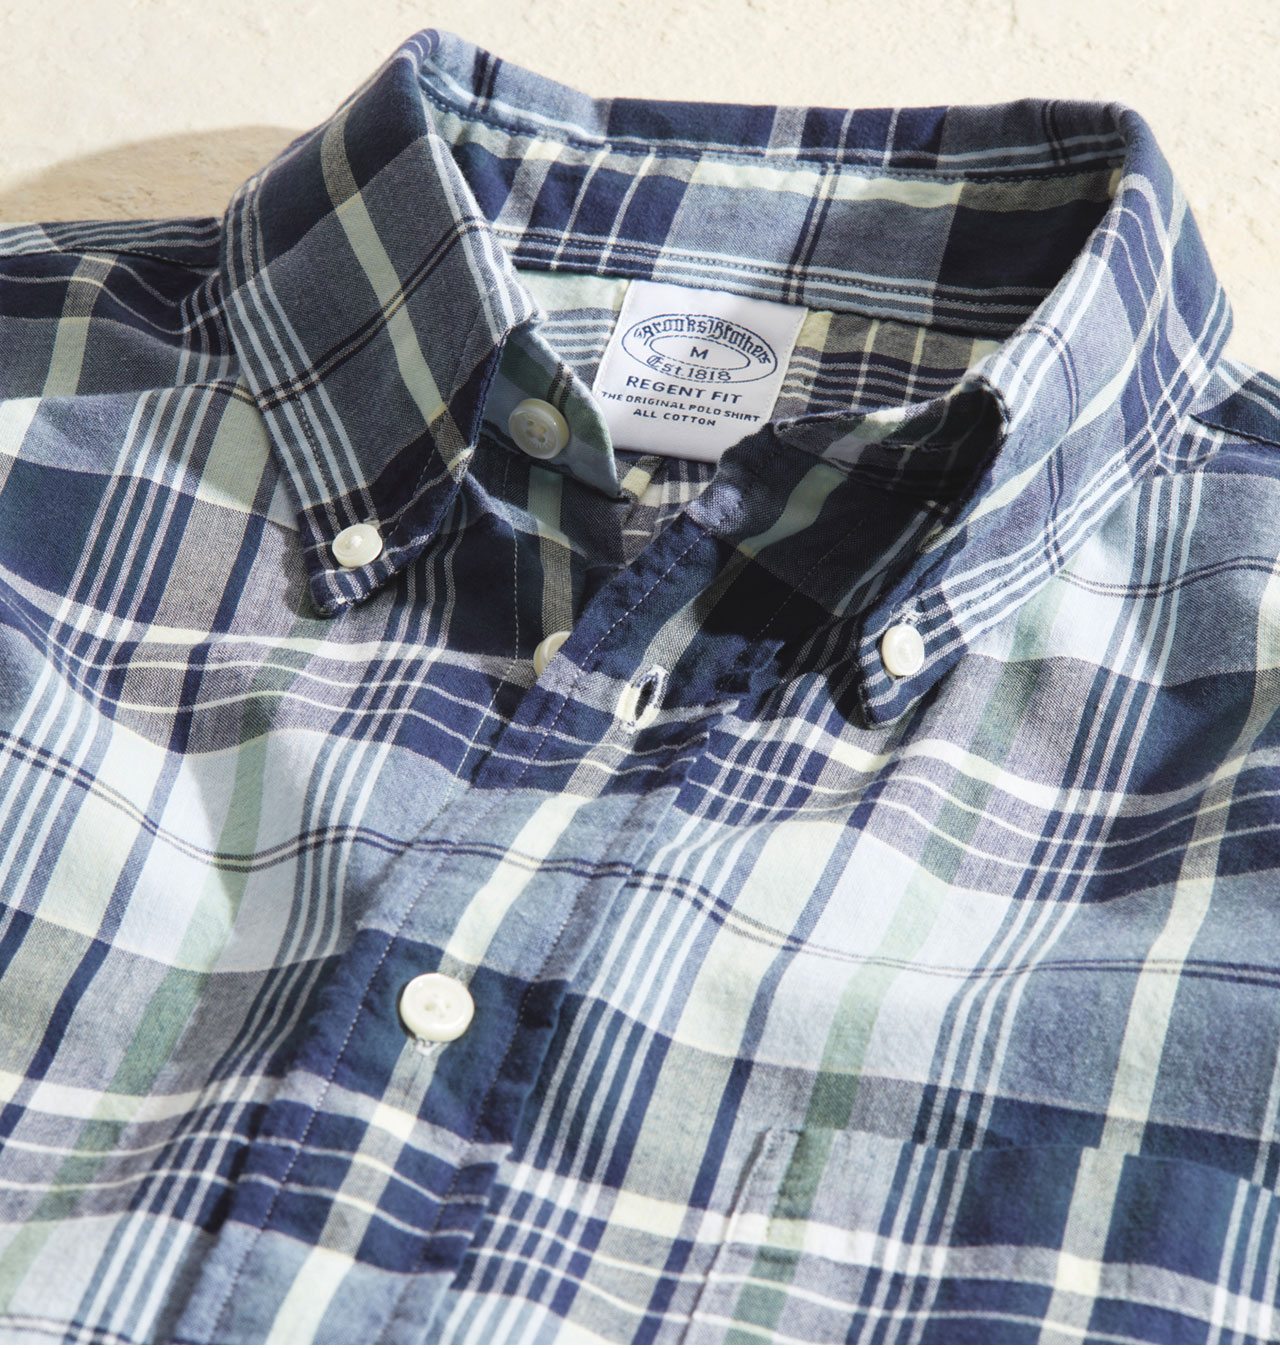 Summer Classic Breezy, eye-catching madras has been a warm-weather favorite since Brooks Brothers introduced it to America 100 years ago. 50% off madras sport shirts